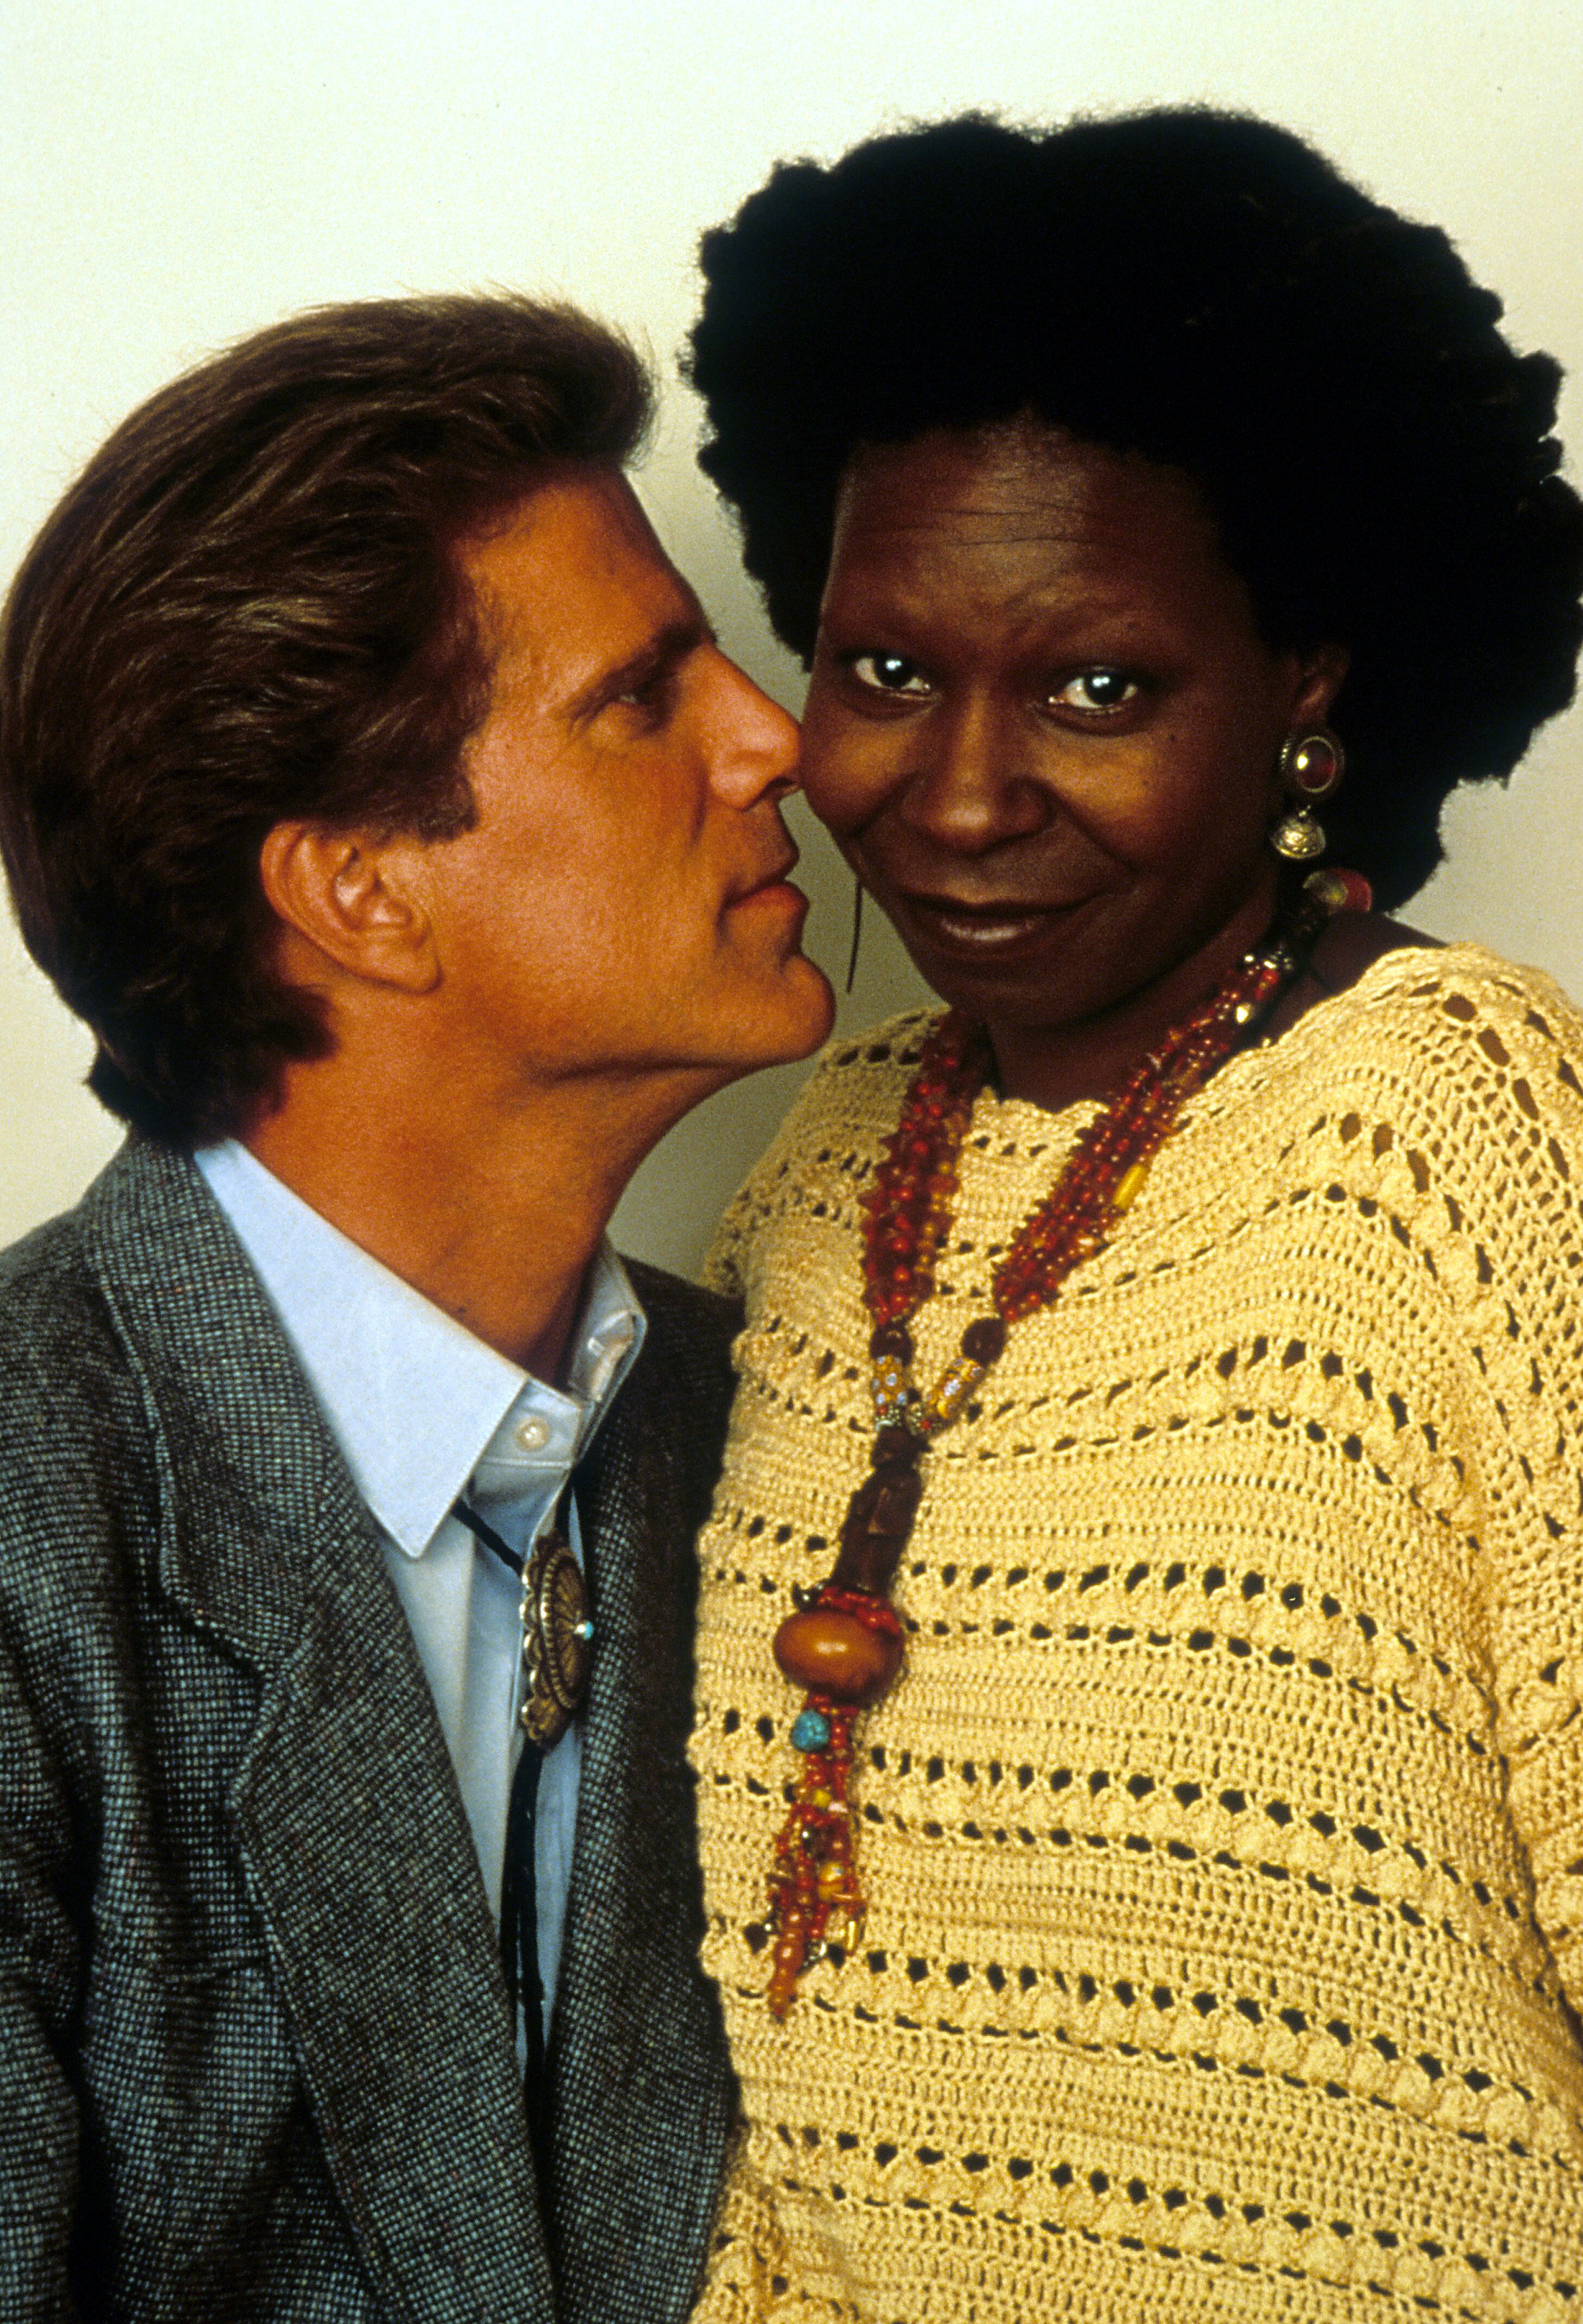 Whoopi Goldberg not amused by Ted Danson's face right up next to her in a scene from the 1993 film 'Made In America' | Source: Getty Images